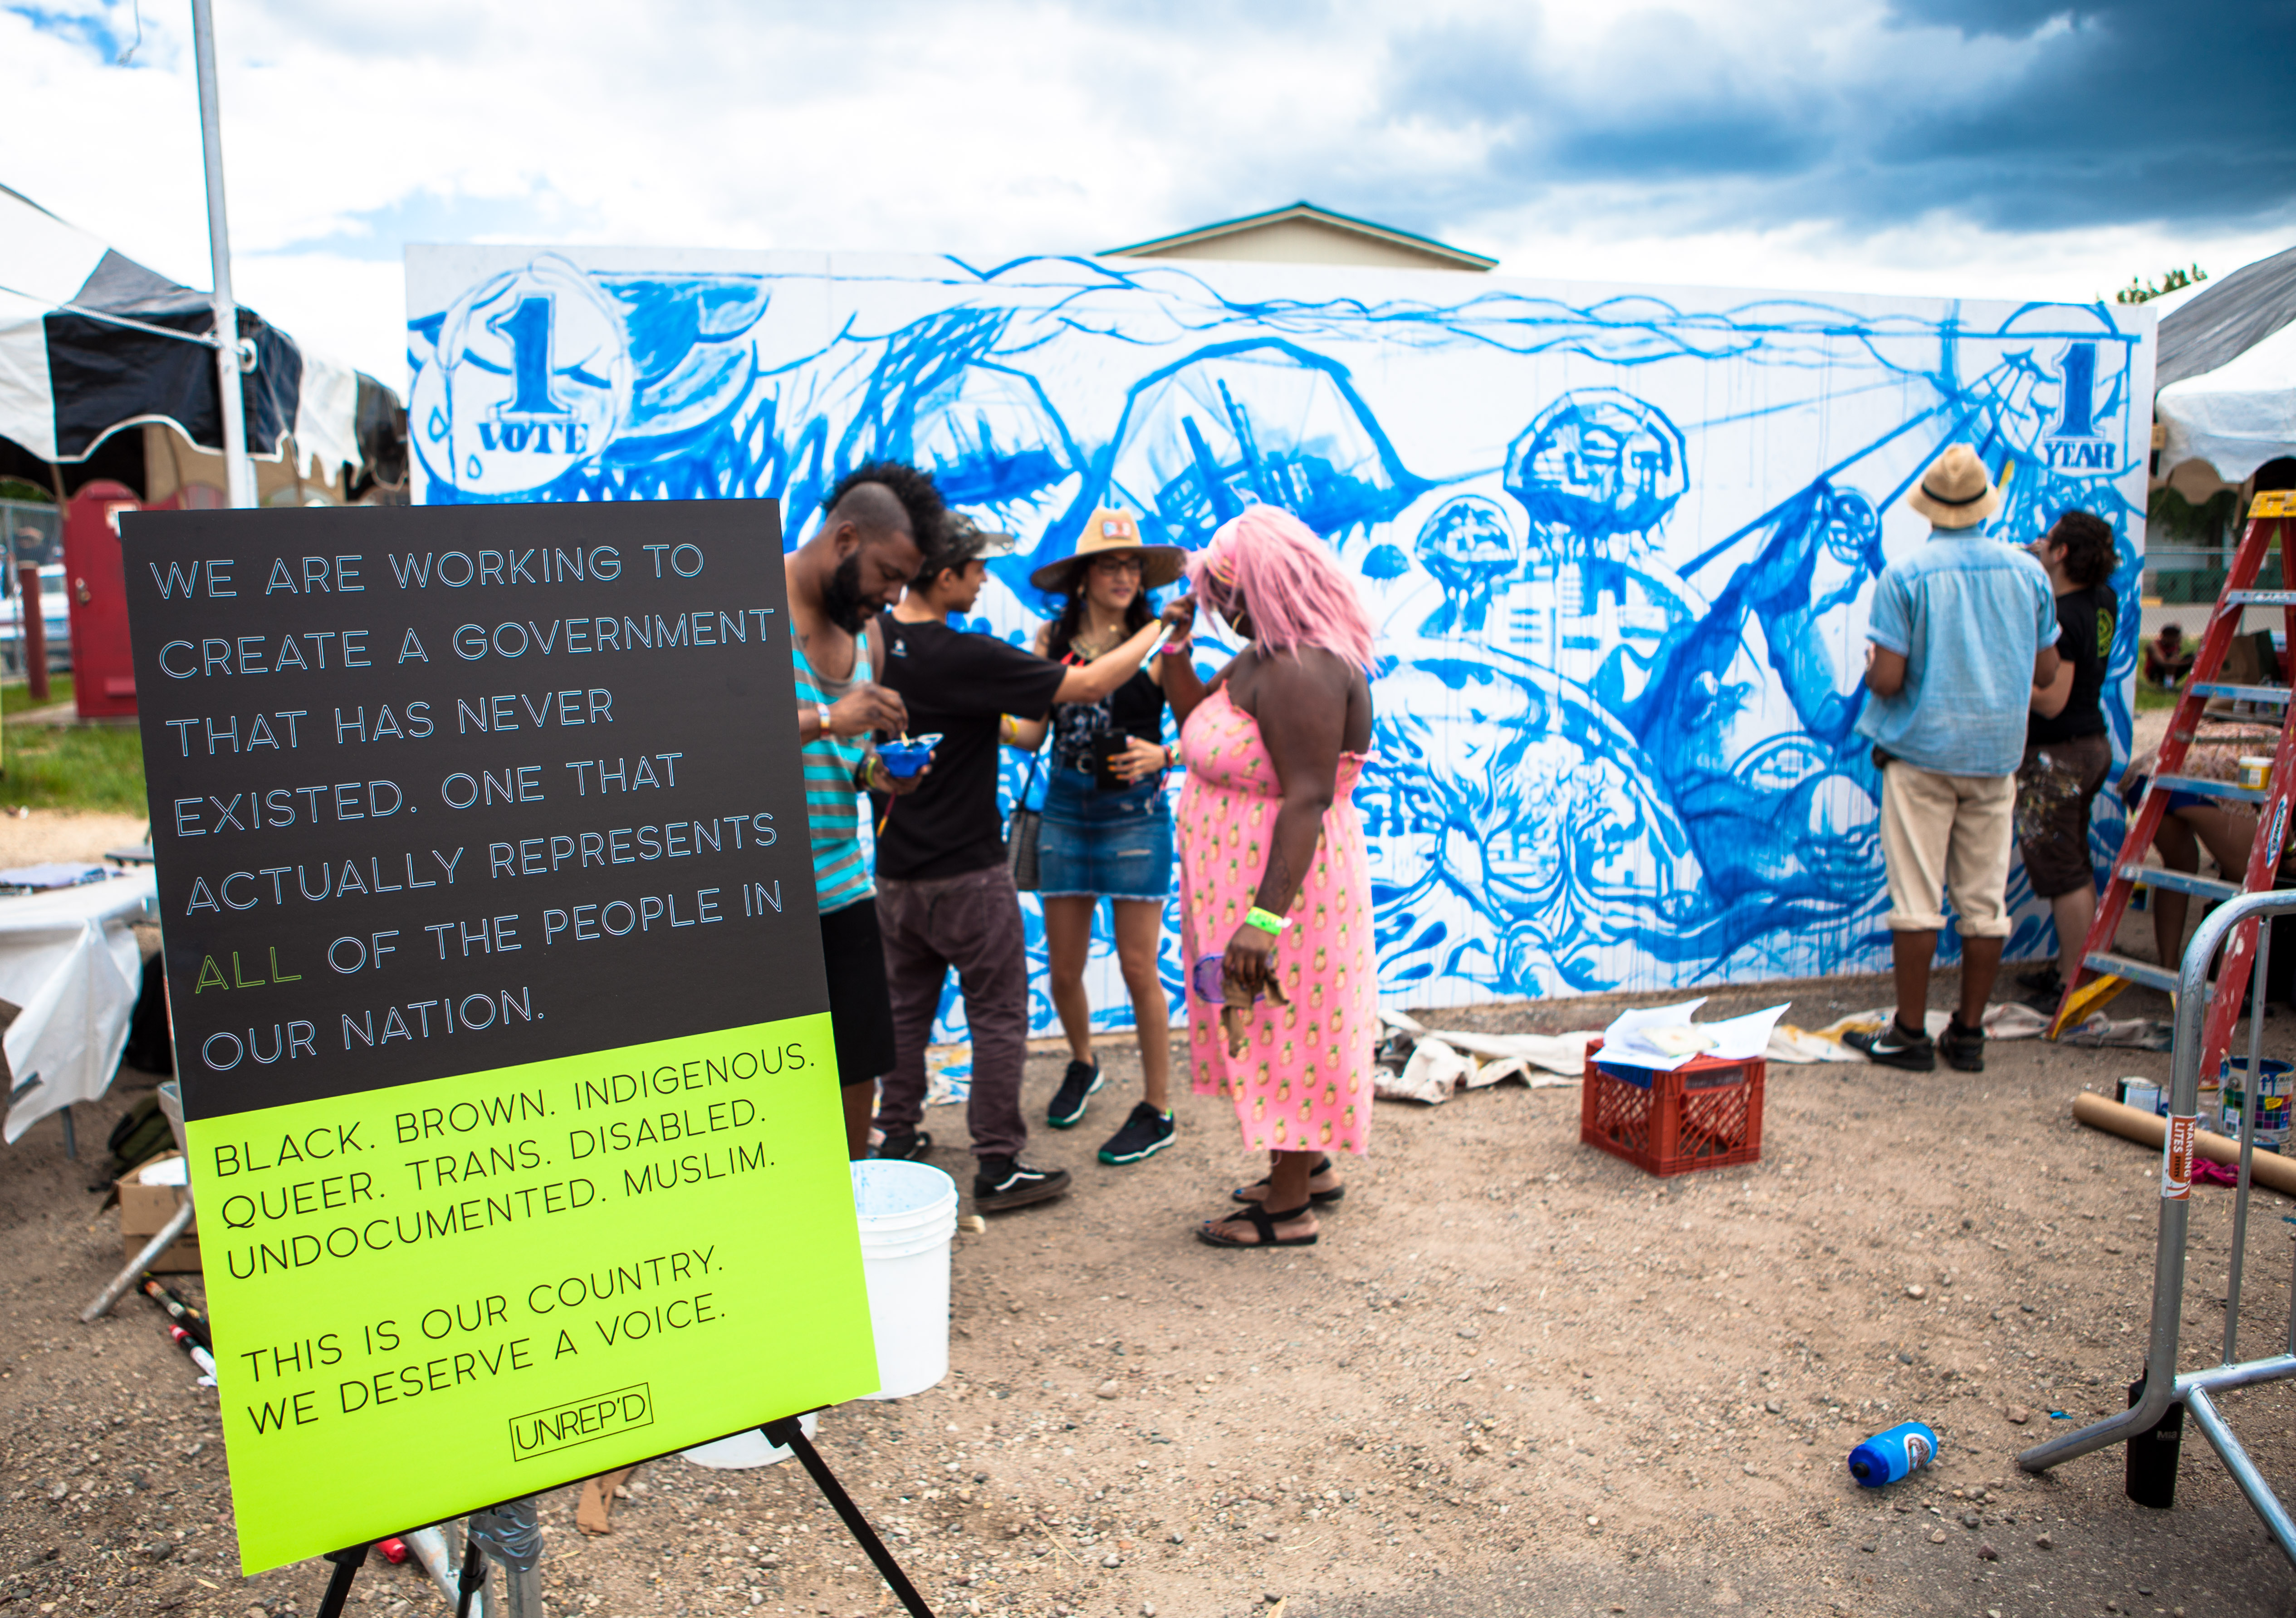 A group of artists stand in front of the beginnings of a mural on a cloudy day. In the foreground, a sign reads, "We are working to create a government that has never existed. One that actually represents all of the people in our nation. Black, brown, Indigenous, queer, trans, disabled, undocumented, Muslim. This is a country. We deserve a voice. UNREPD.